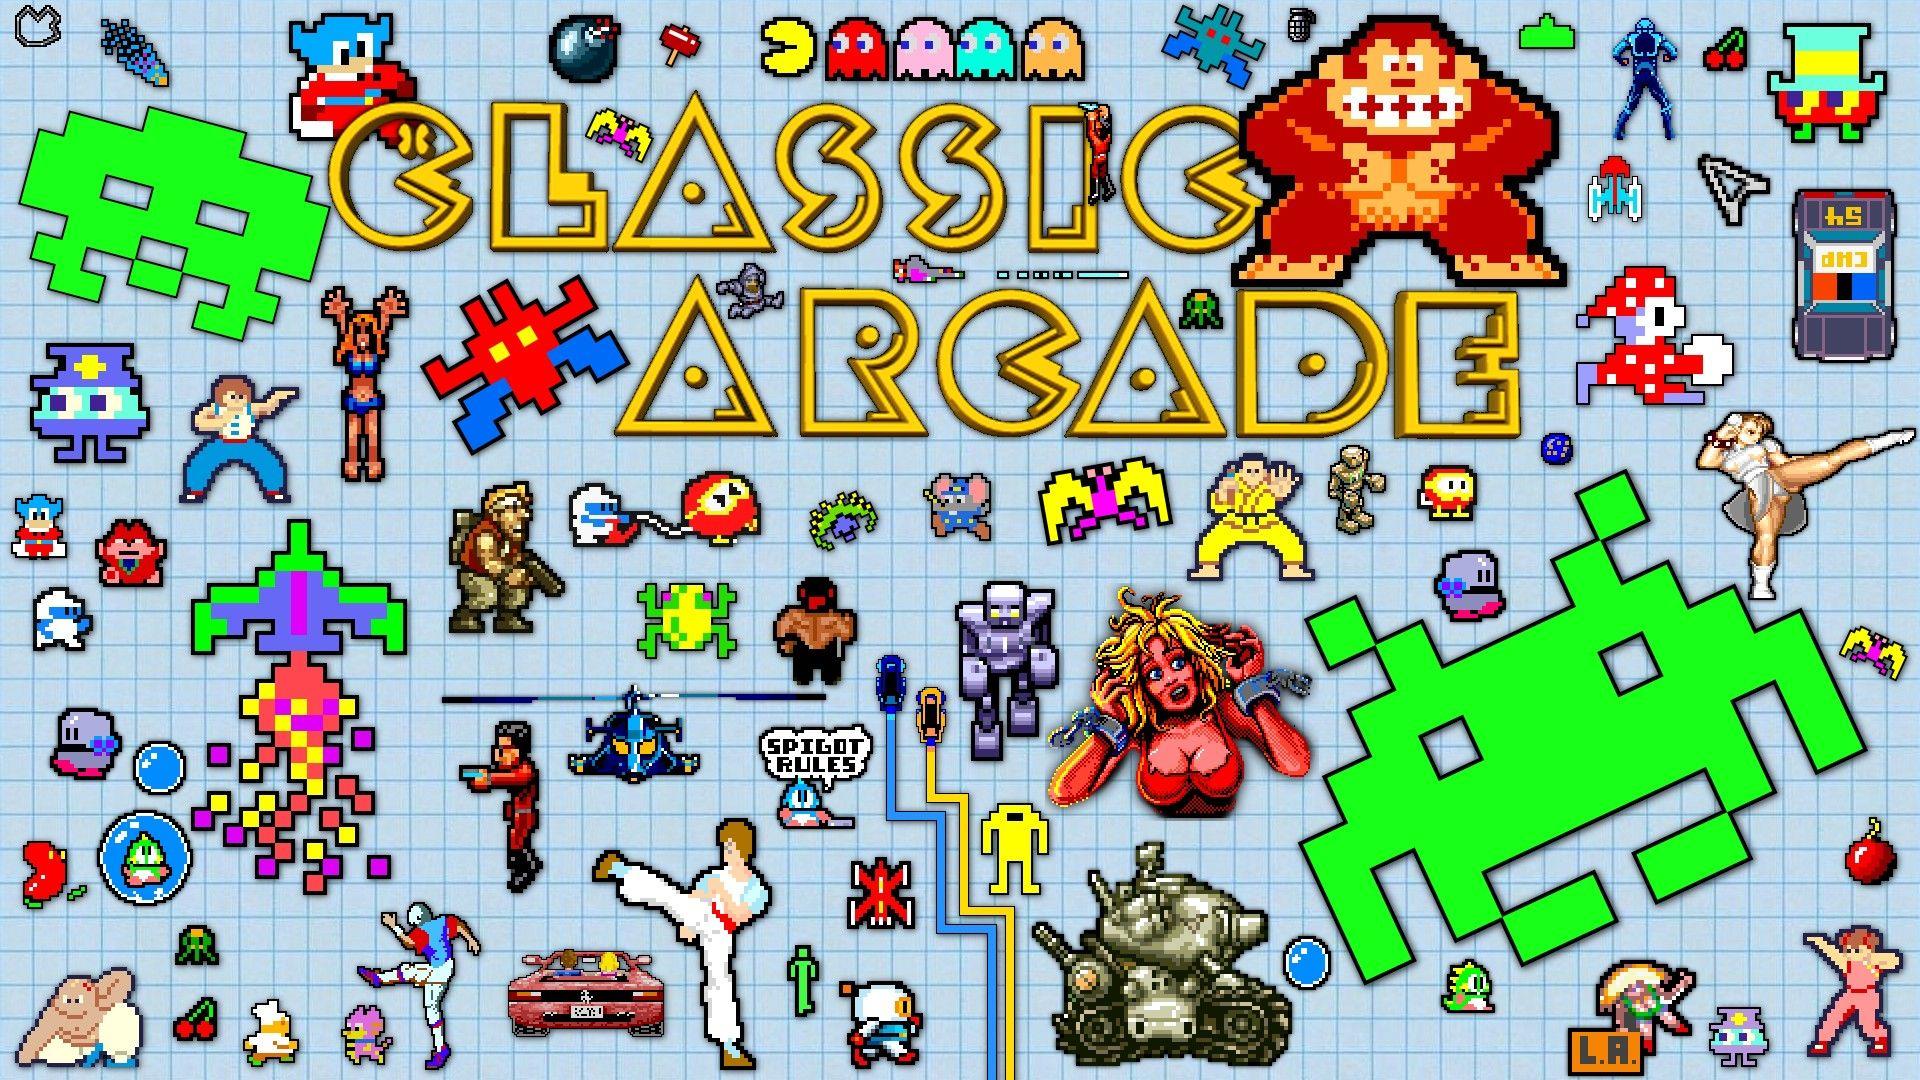 Arcade Wallpaper. Decided To 1080 Fie My Arcade Classic Wallpaper Hope You Like It. Classic Video Games, Retro Arcade Games, Retro Games Wallpaper